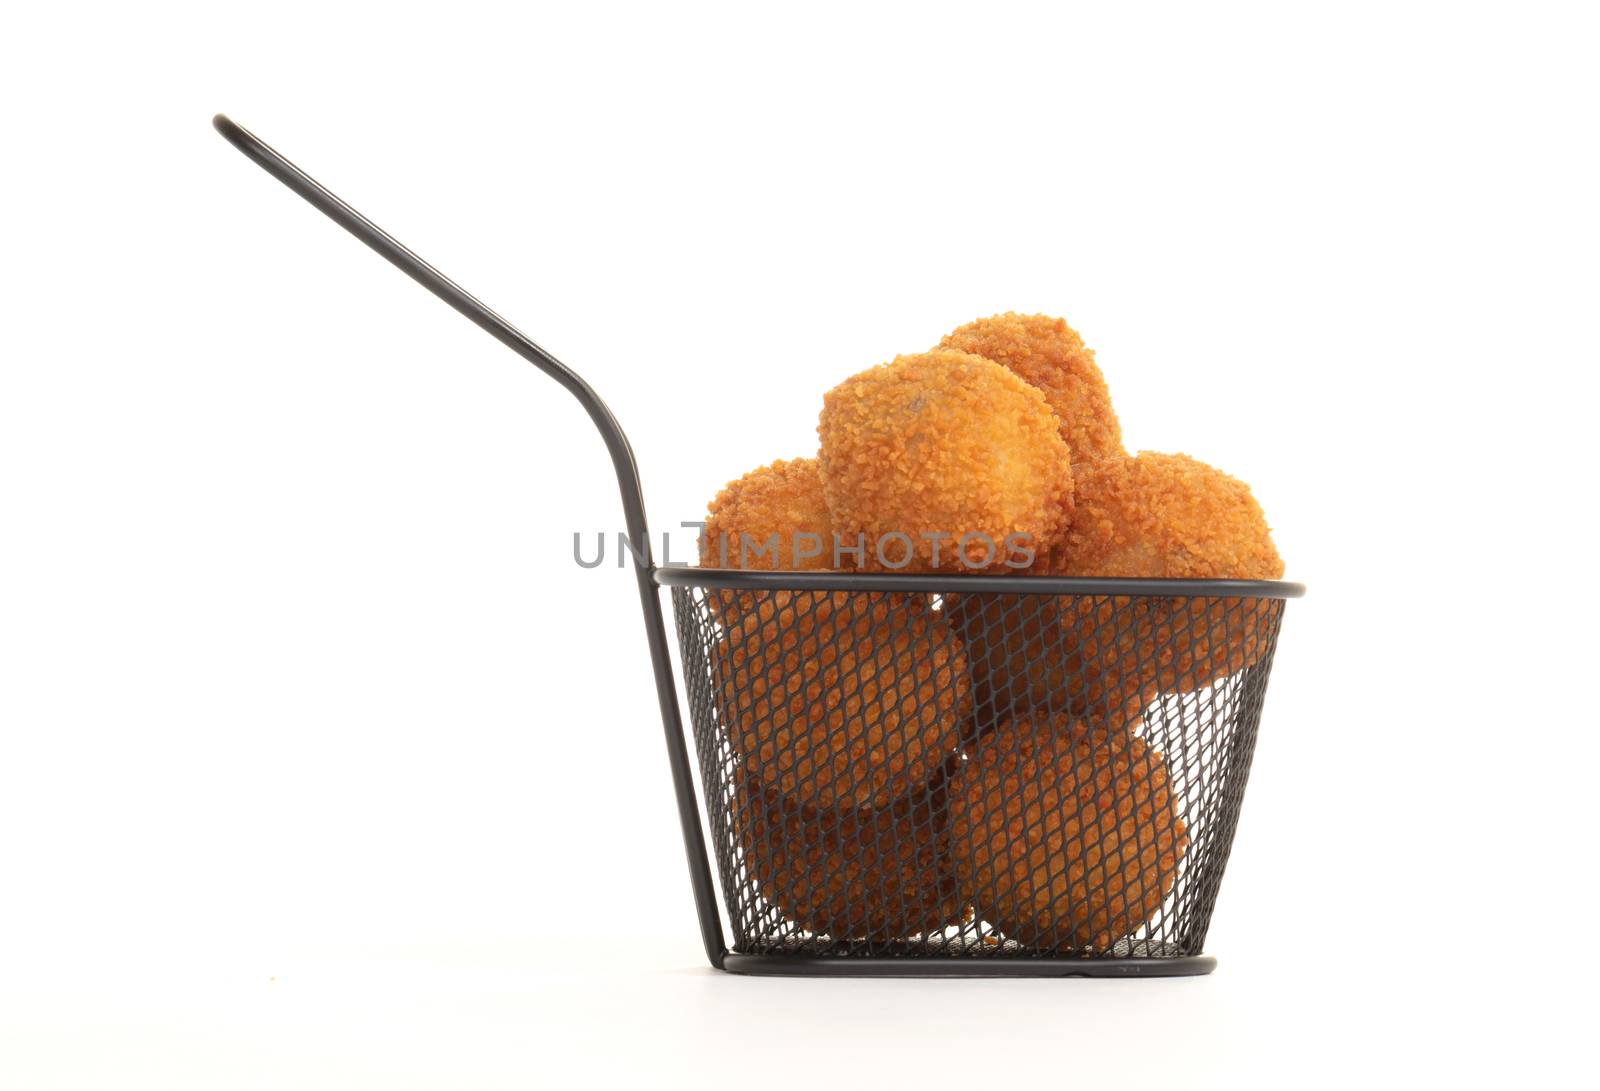 Dutch traditional snack bitterbal in a small basket by michaklootwijk